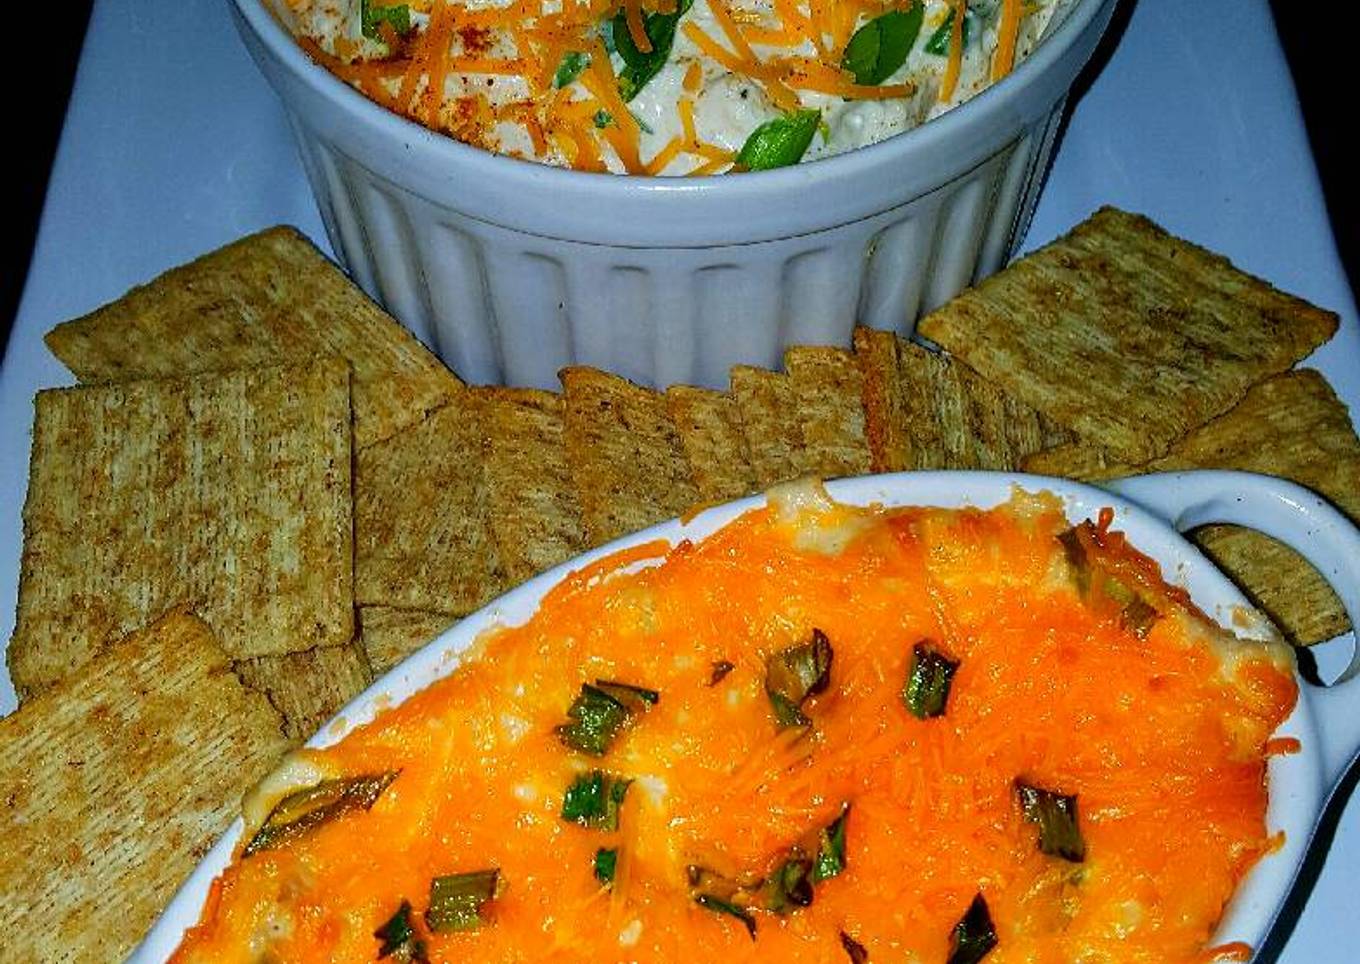 Mike's Creamy Hot Crab Dip & Chilled Spread